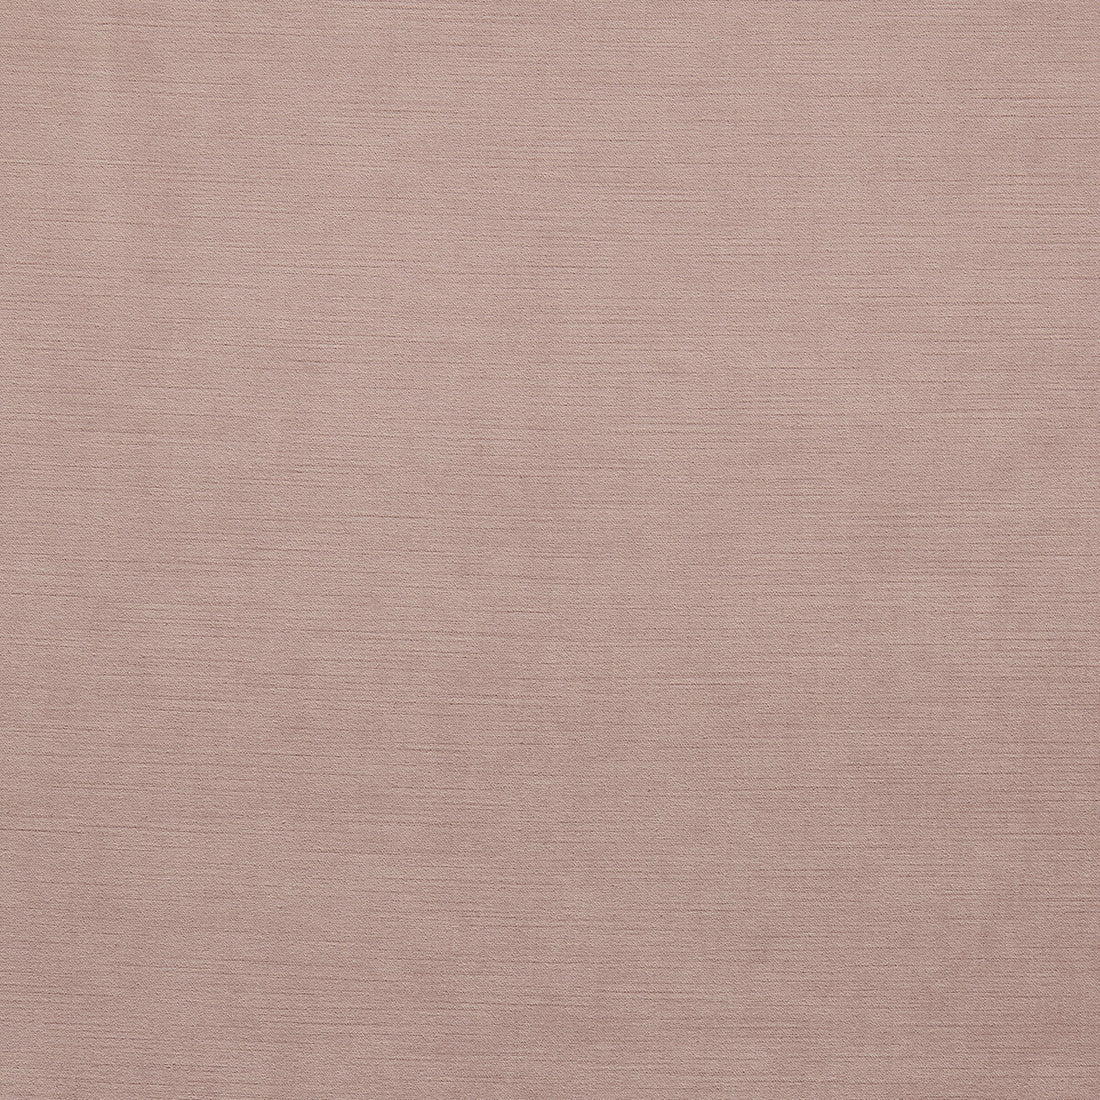 Riva fabric in blush color - pattern F1583/03.CAC.0 - by Clarke And Clarke in the Clarke &amp; Clarke Riva collection